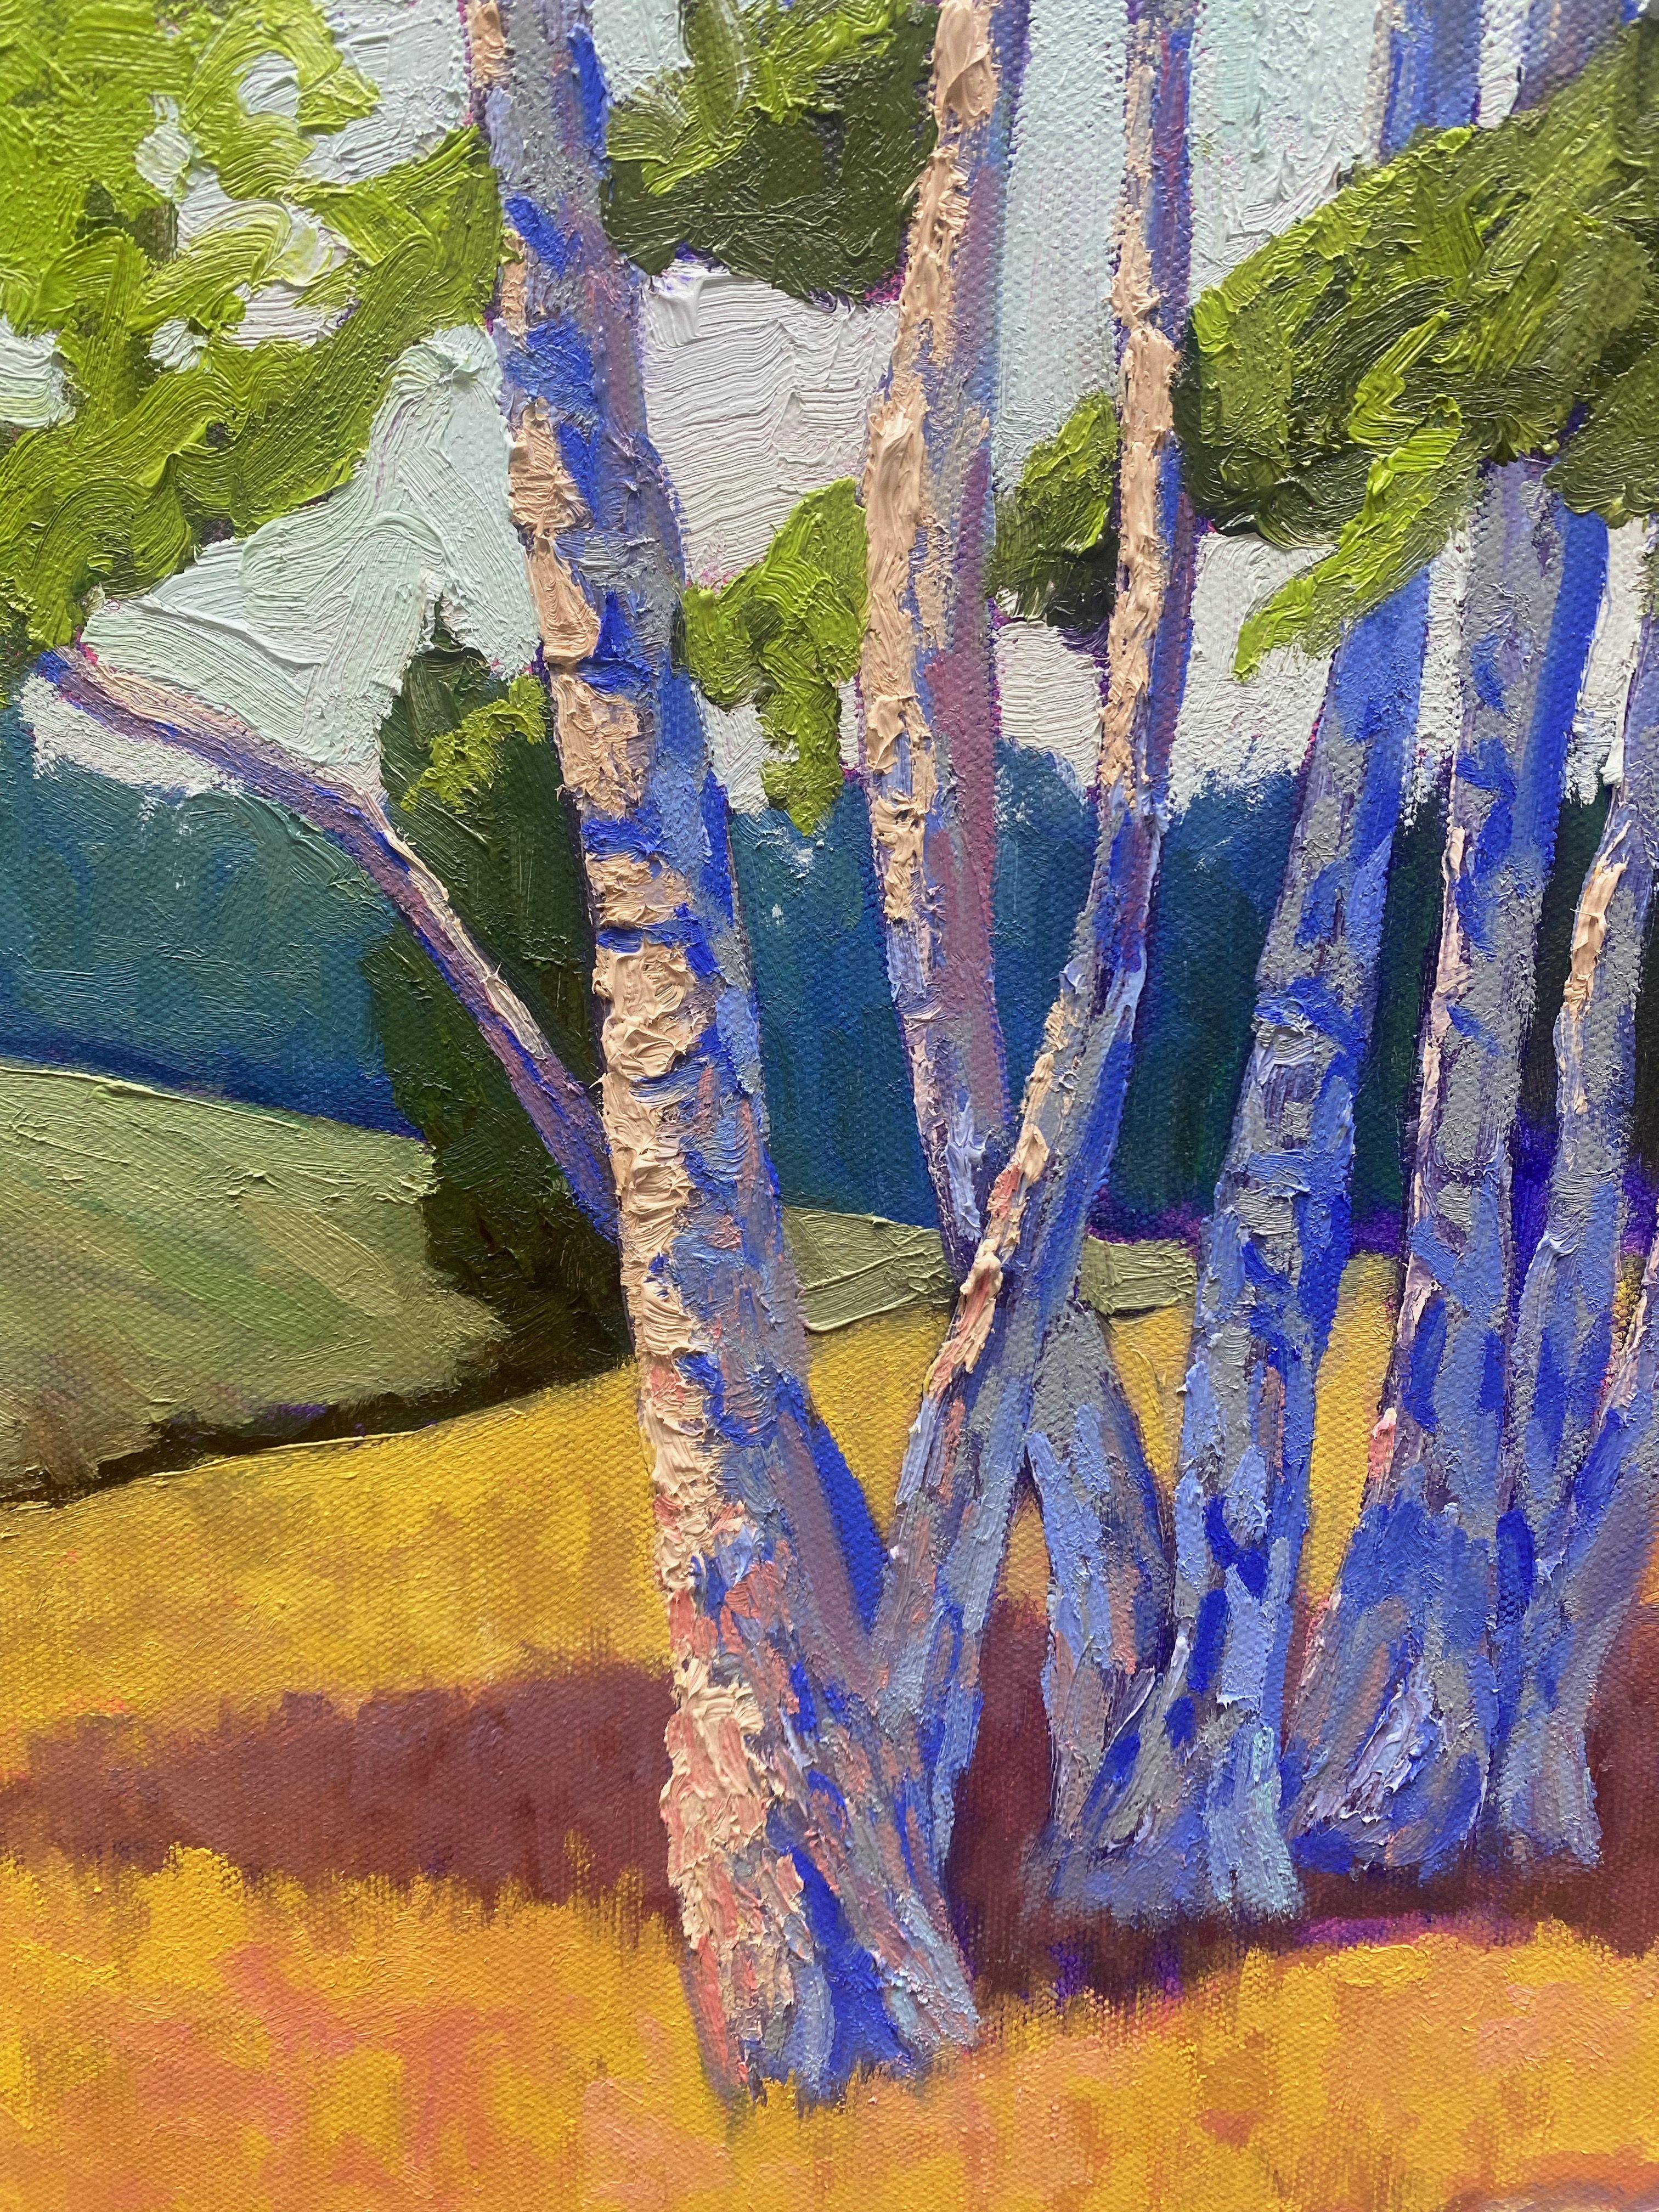 The painiting was created during a meeting with my painter colleagues in my studio based on a photo by Edeltraud Woydeck. This is the second version and, like the first, was a great experience to paint. I love these trees. I wanted to play and